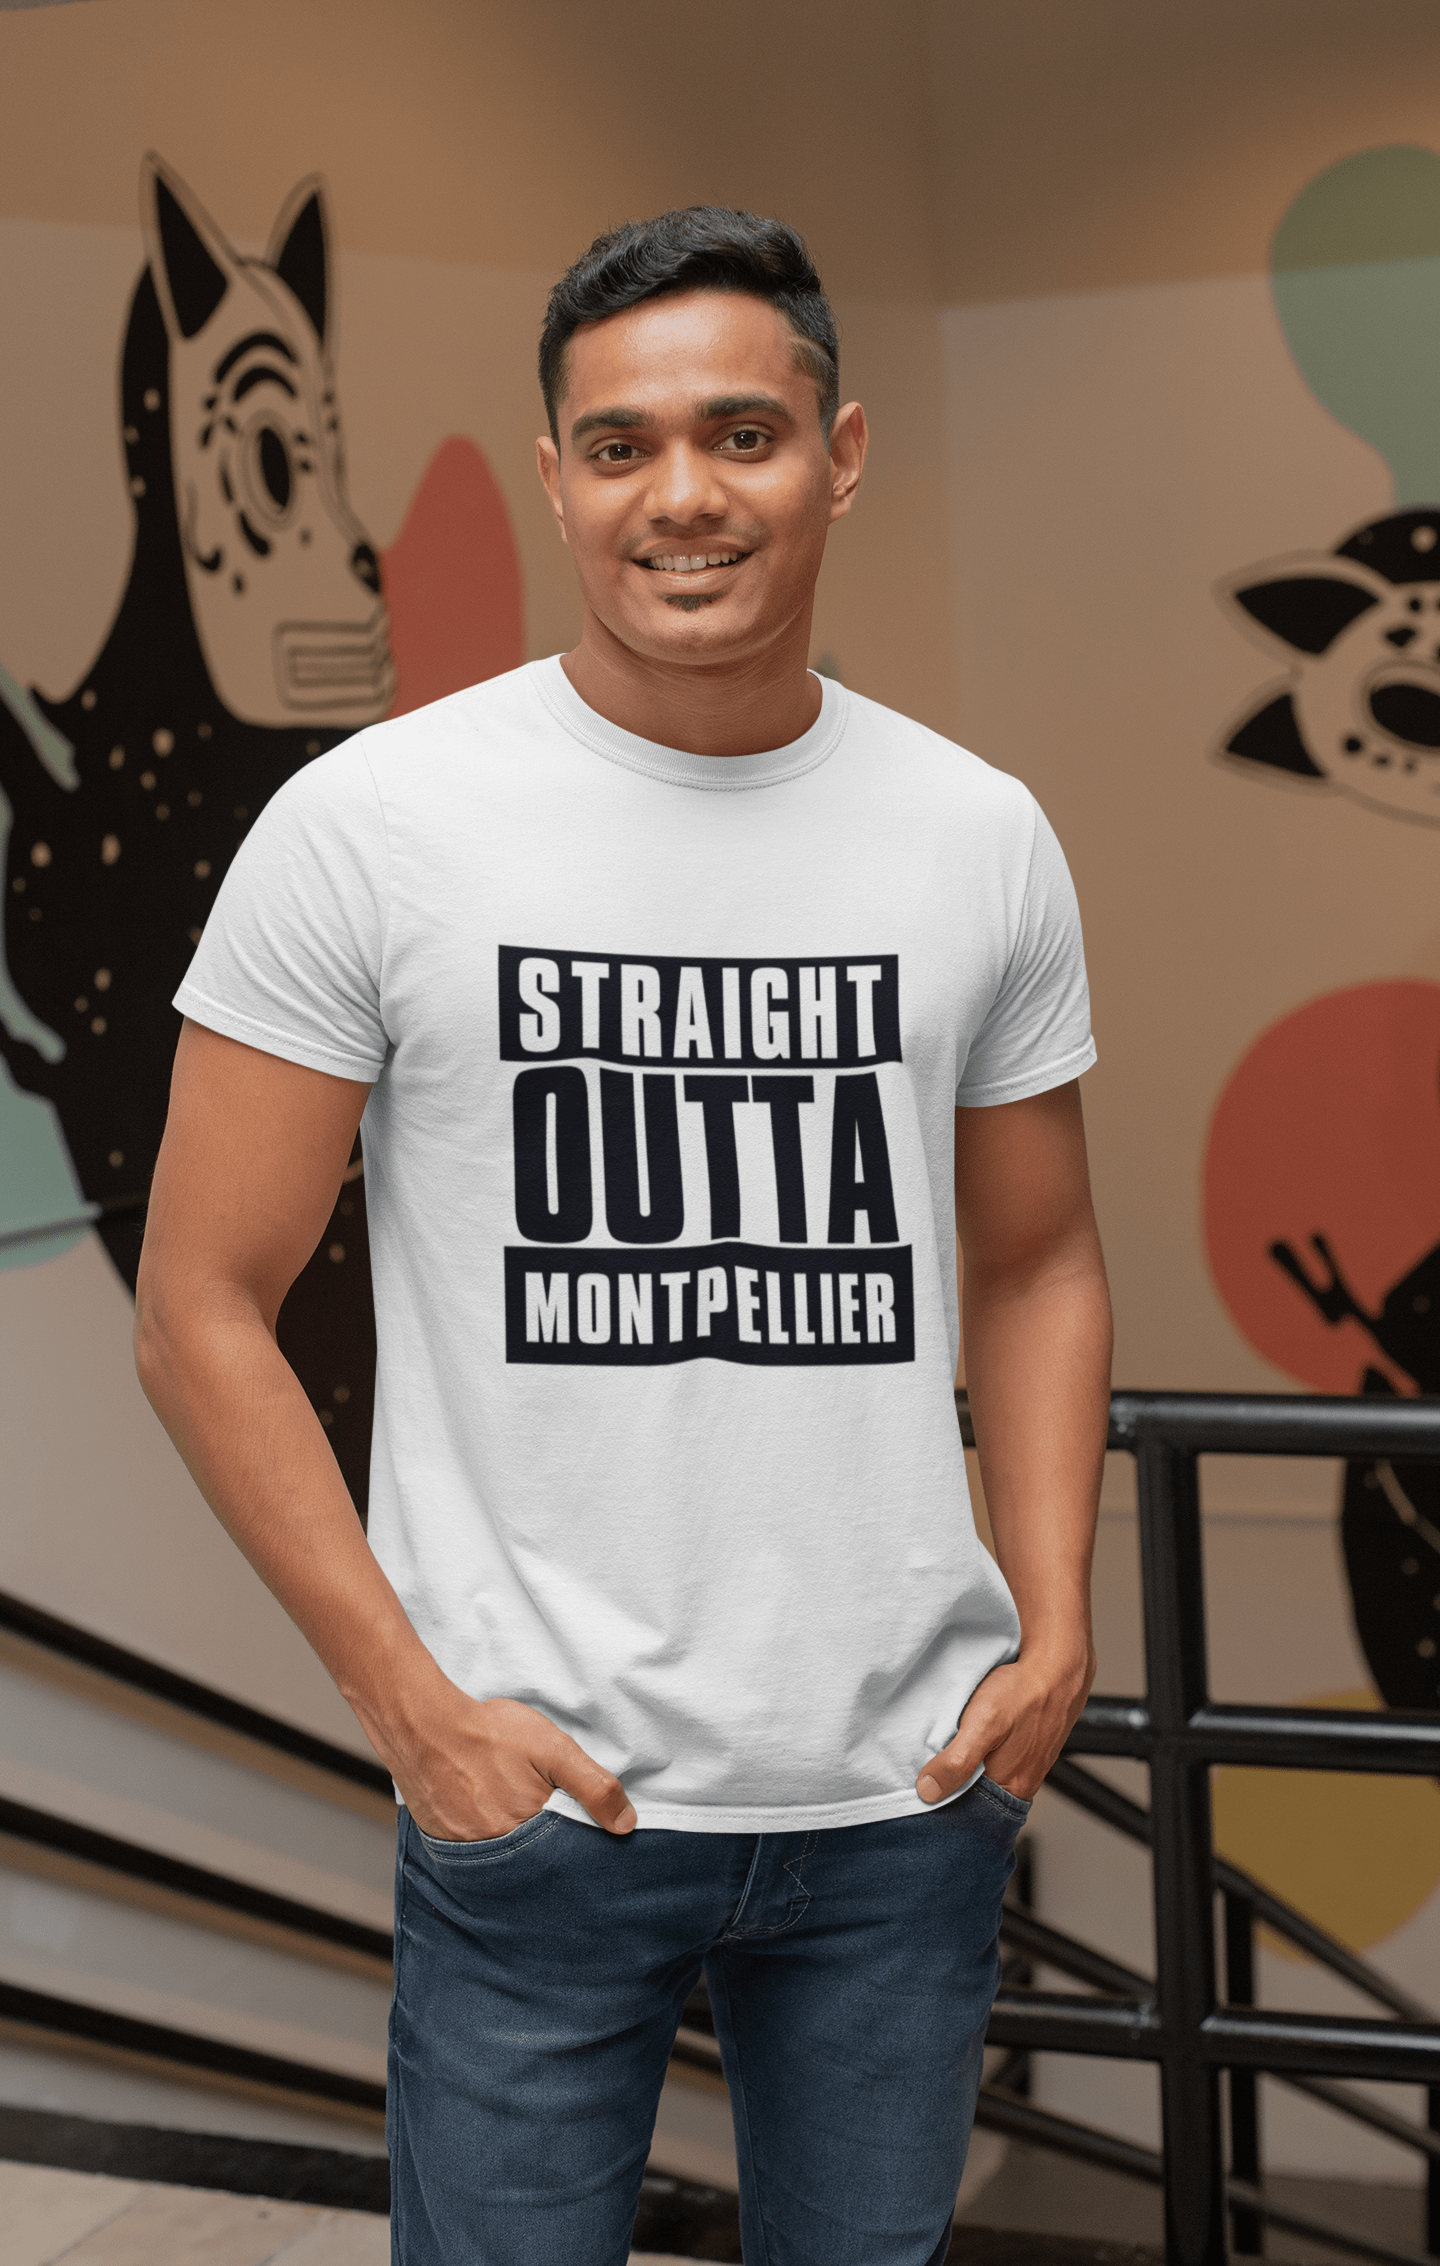 Straight Outta Montpellier, t Shirt Homme, t Shirt Straight Outta, Cadeau Homme